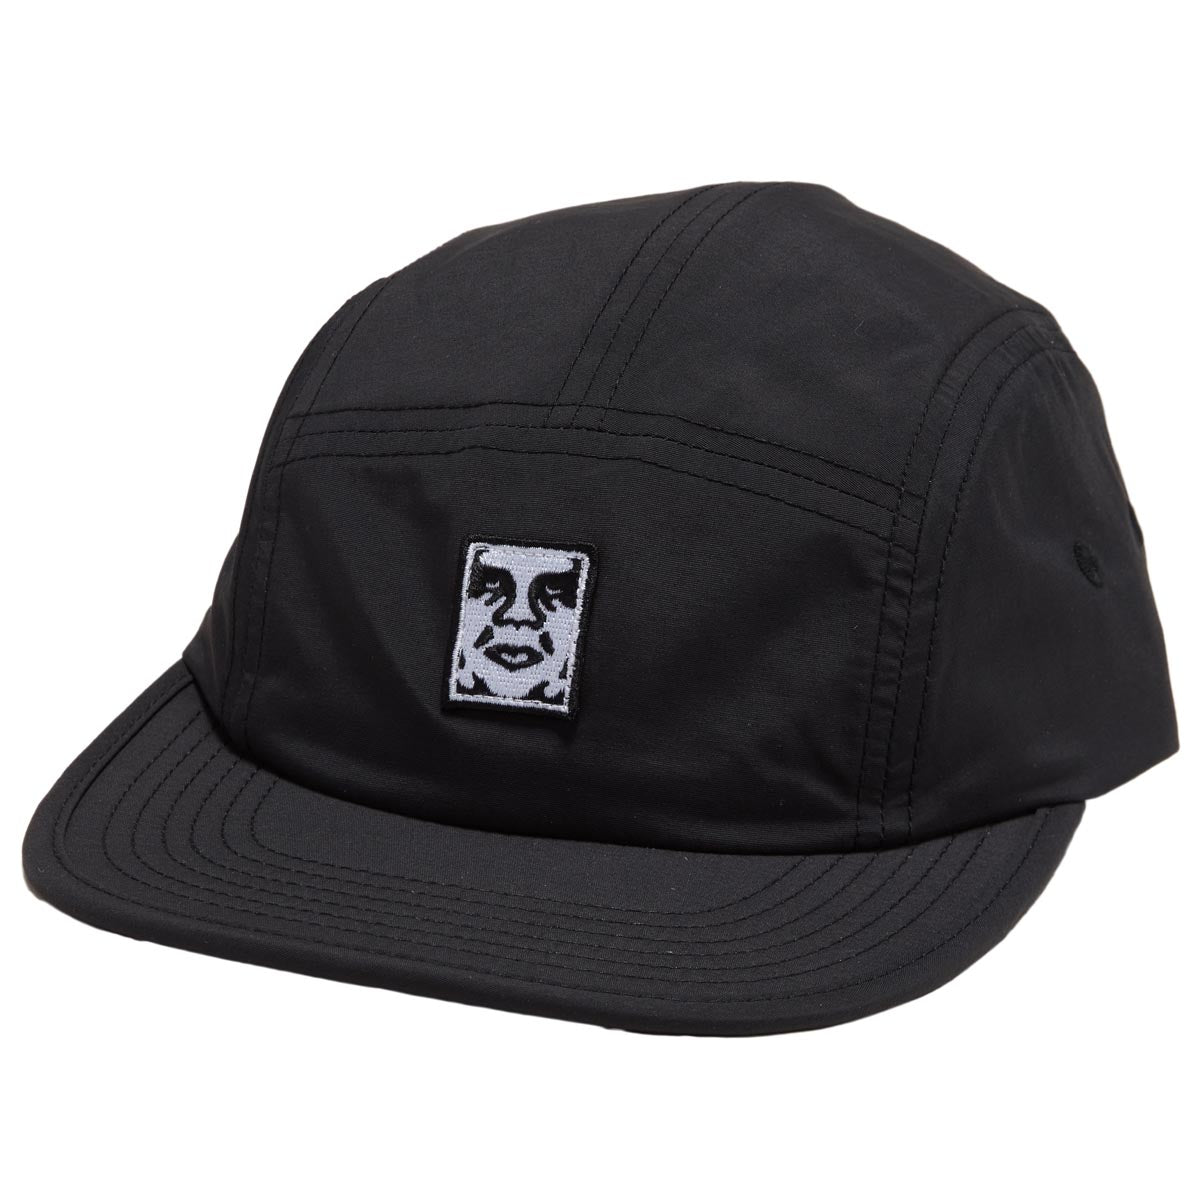 Obey Icon Patch Camp Hat - Black image 1